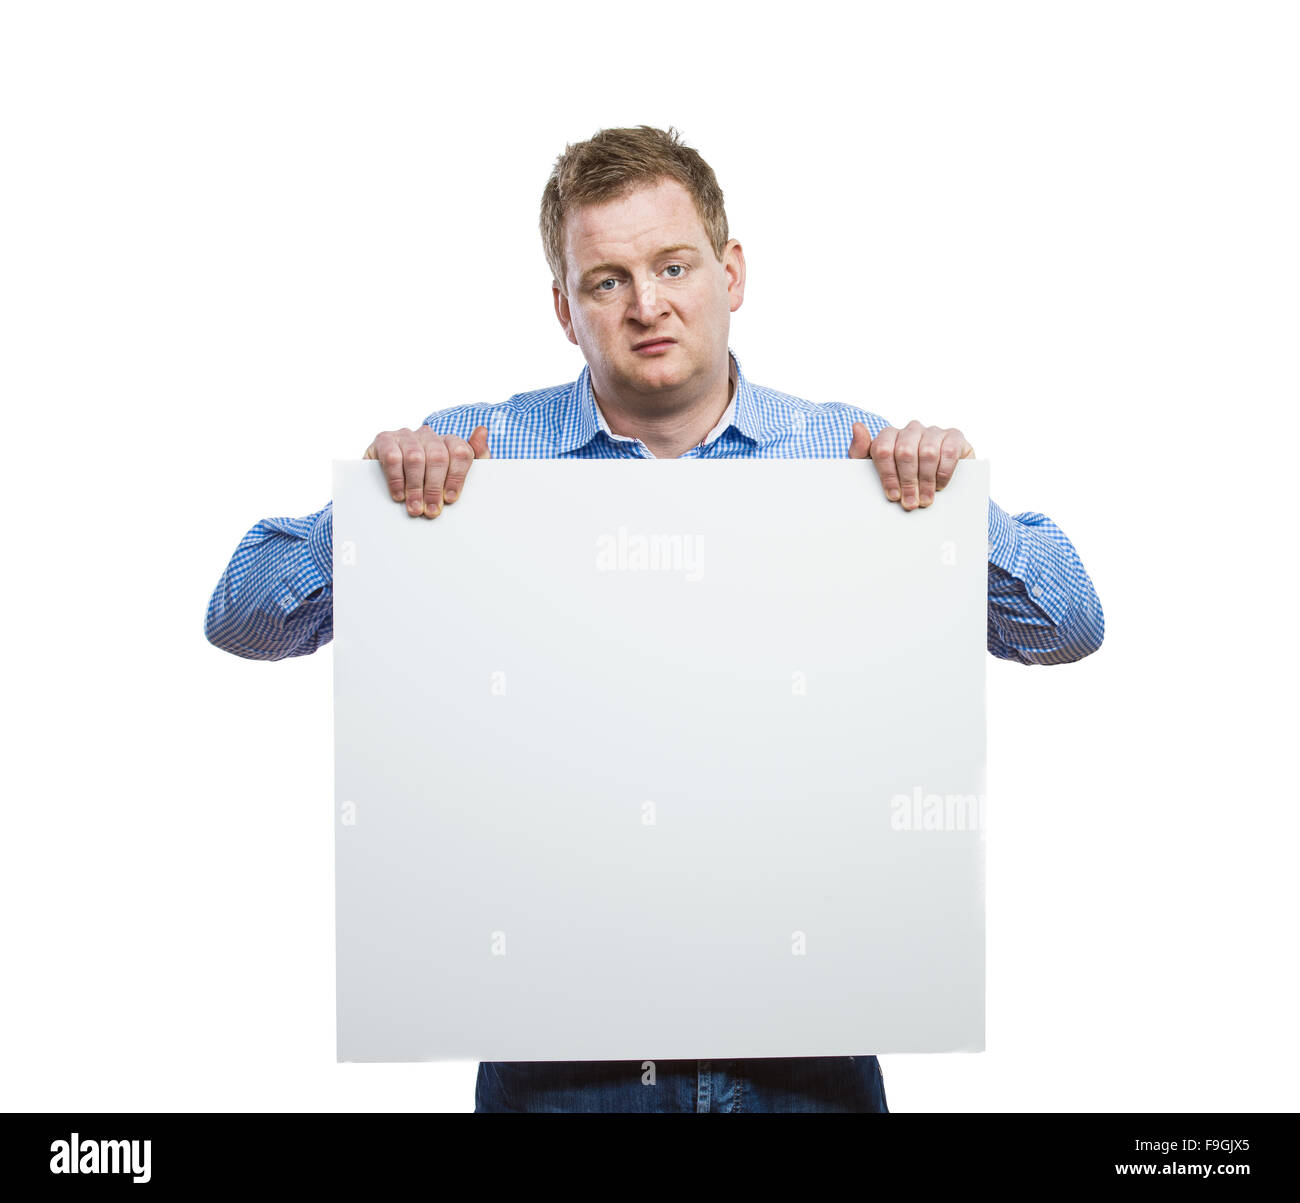 Young man making funny face, holding a blank sign board. Studio shot on white background. Stock Photo